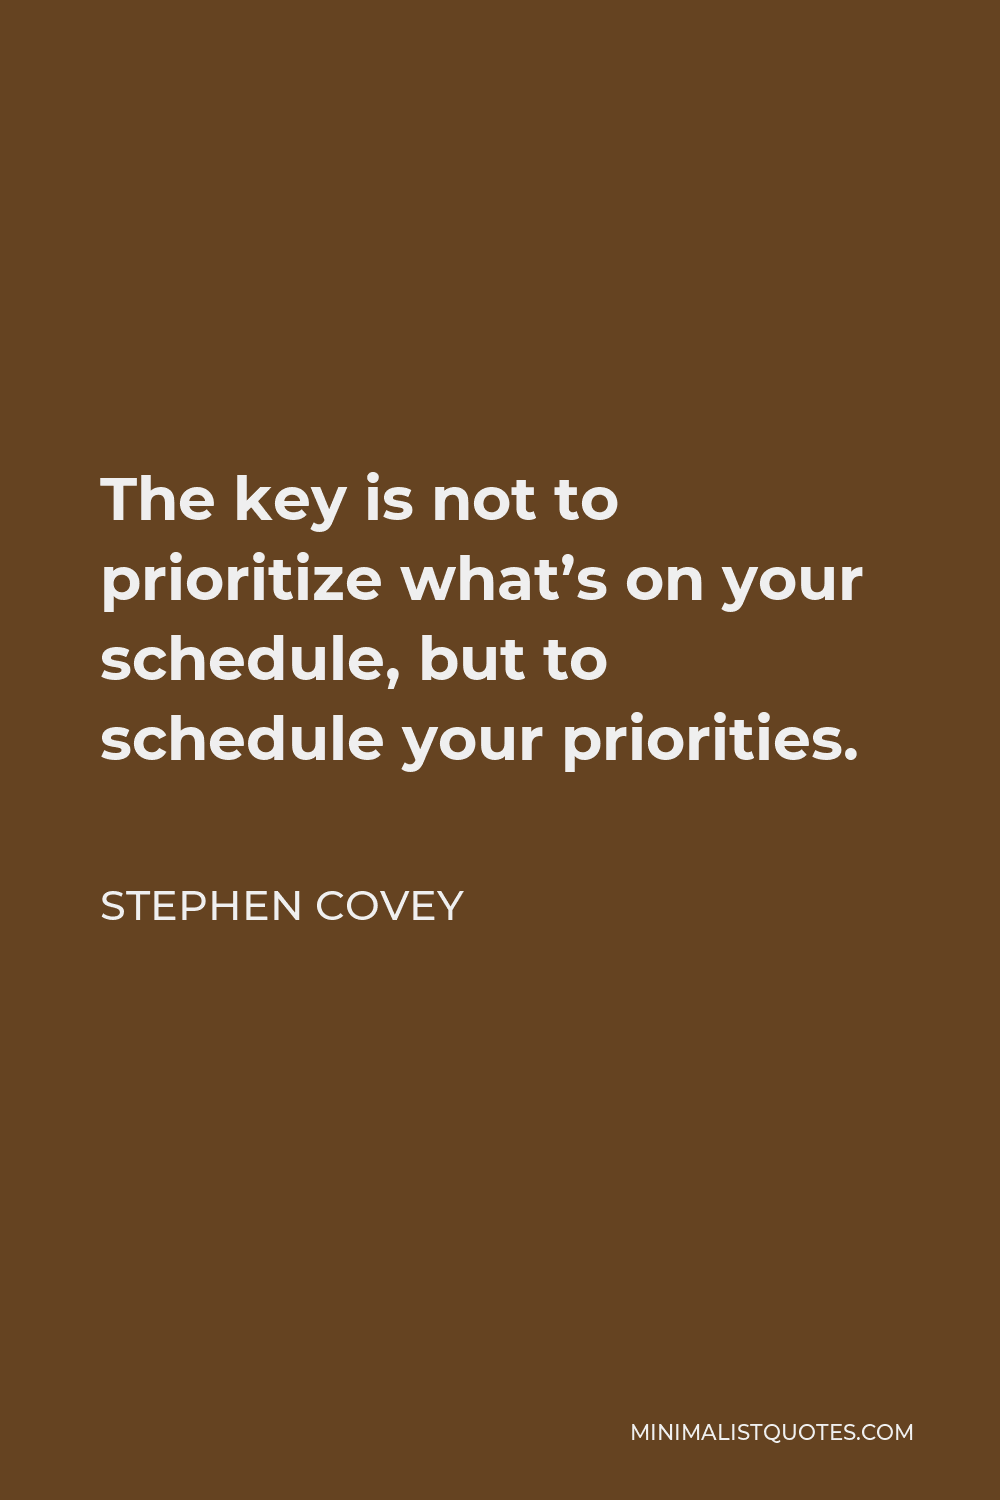 Stephen Covey Quote - The key is not to prioritize what’s on your schedule, but to schedule your priorities.